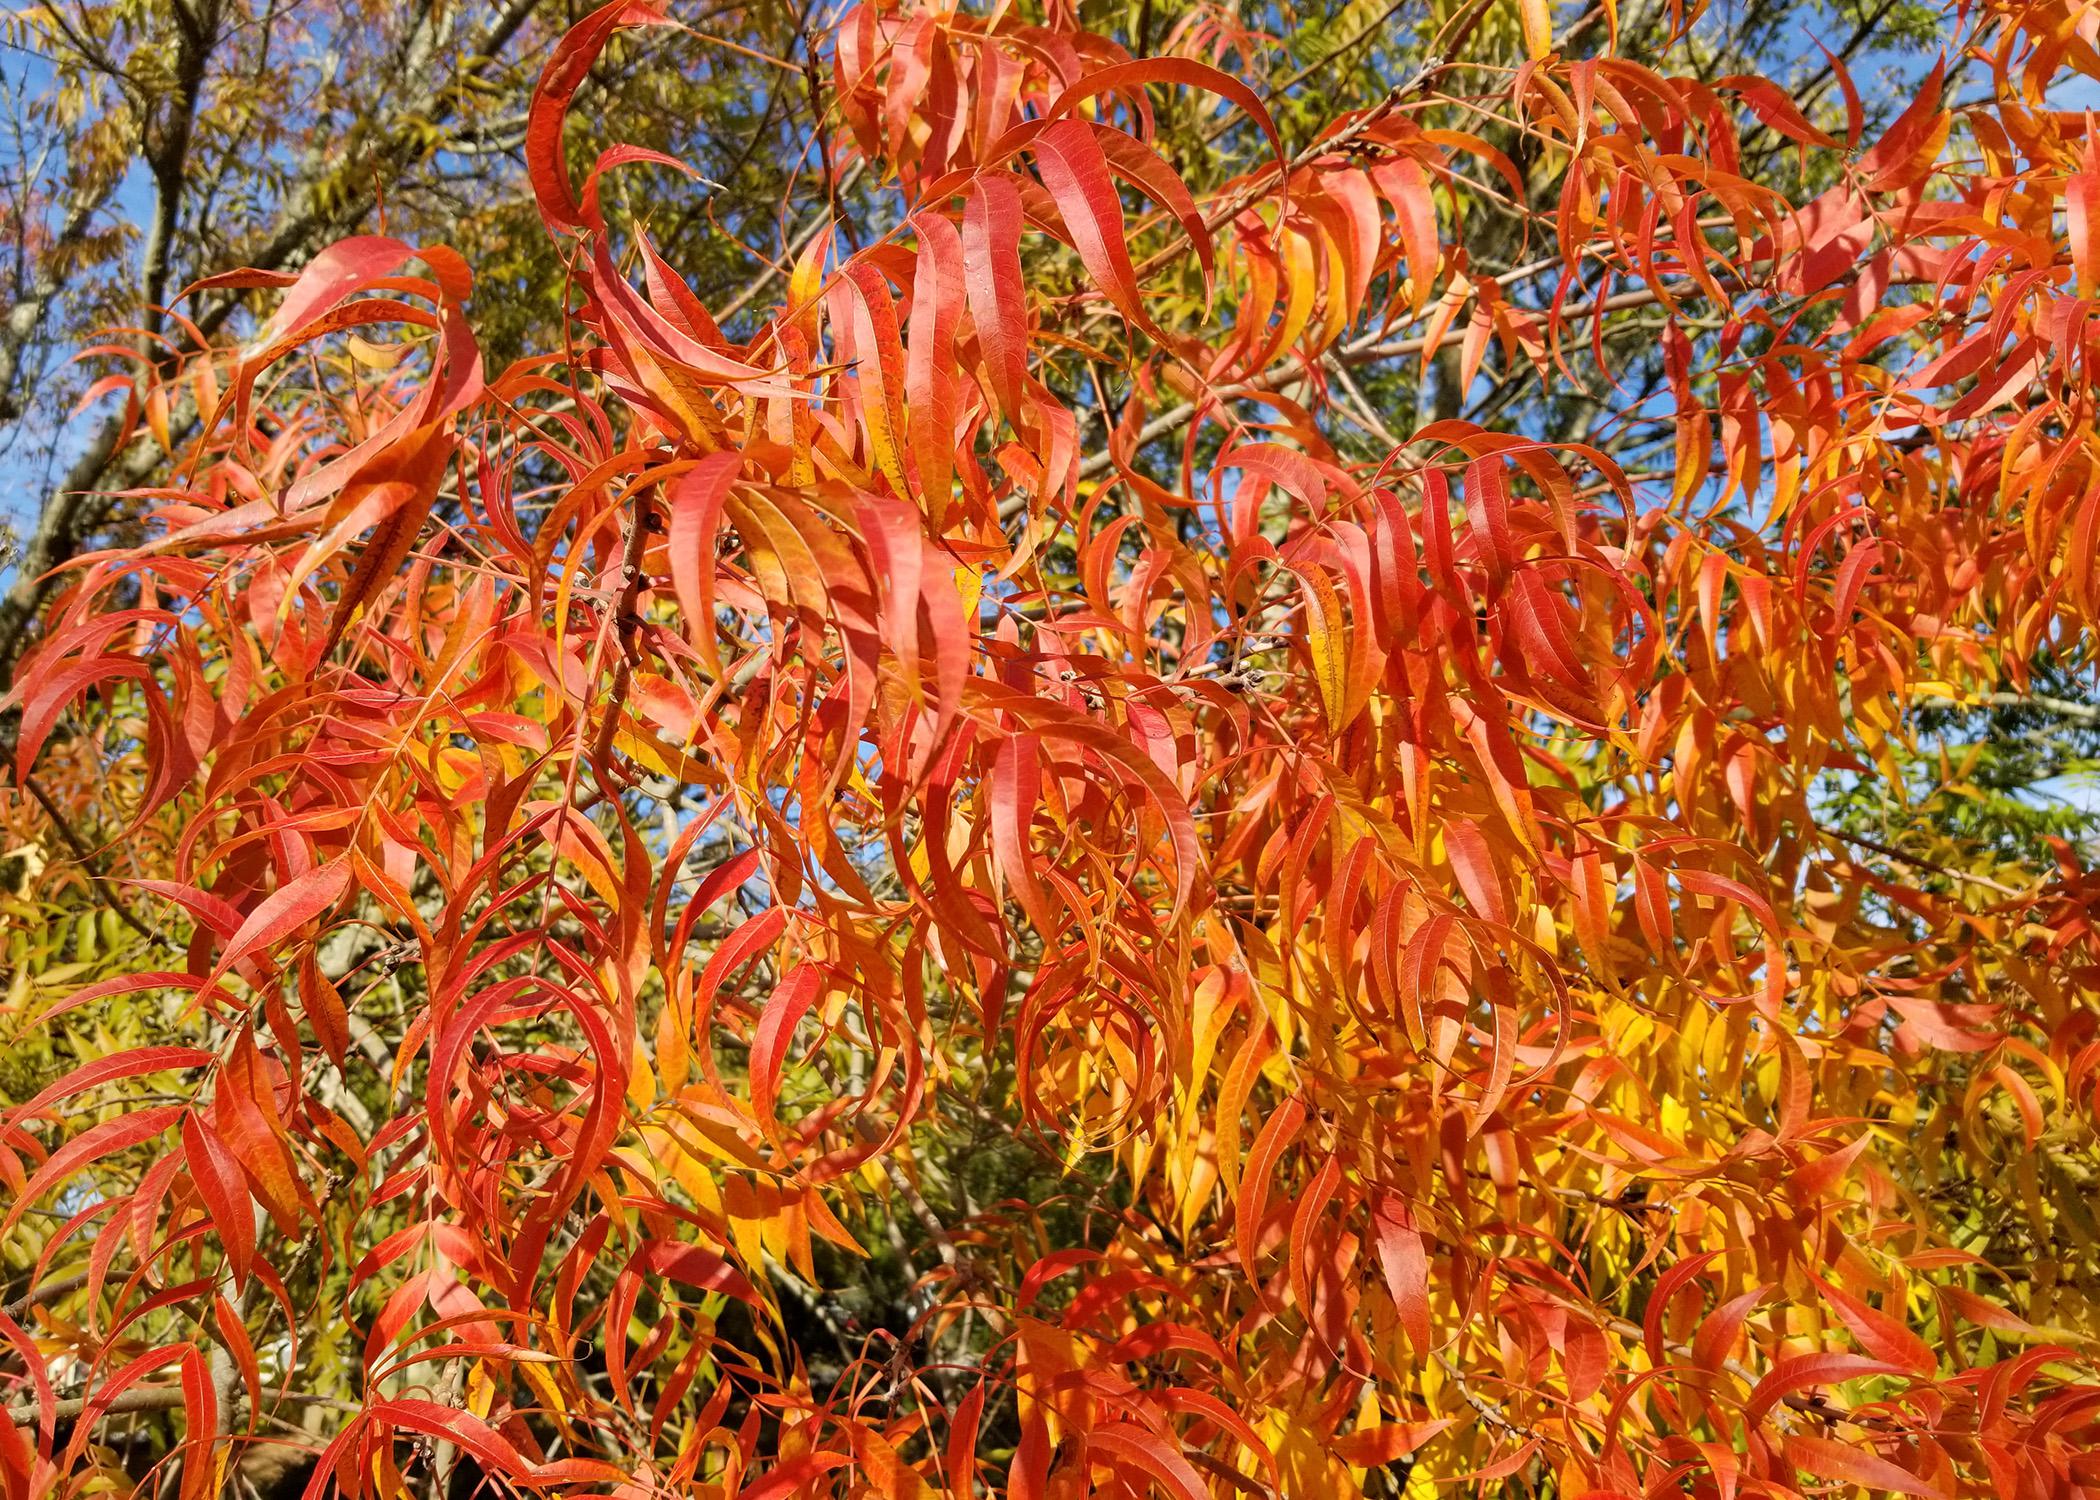 Long, narrow orange and red leaves dangle from branches.